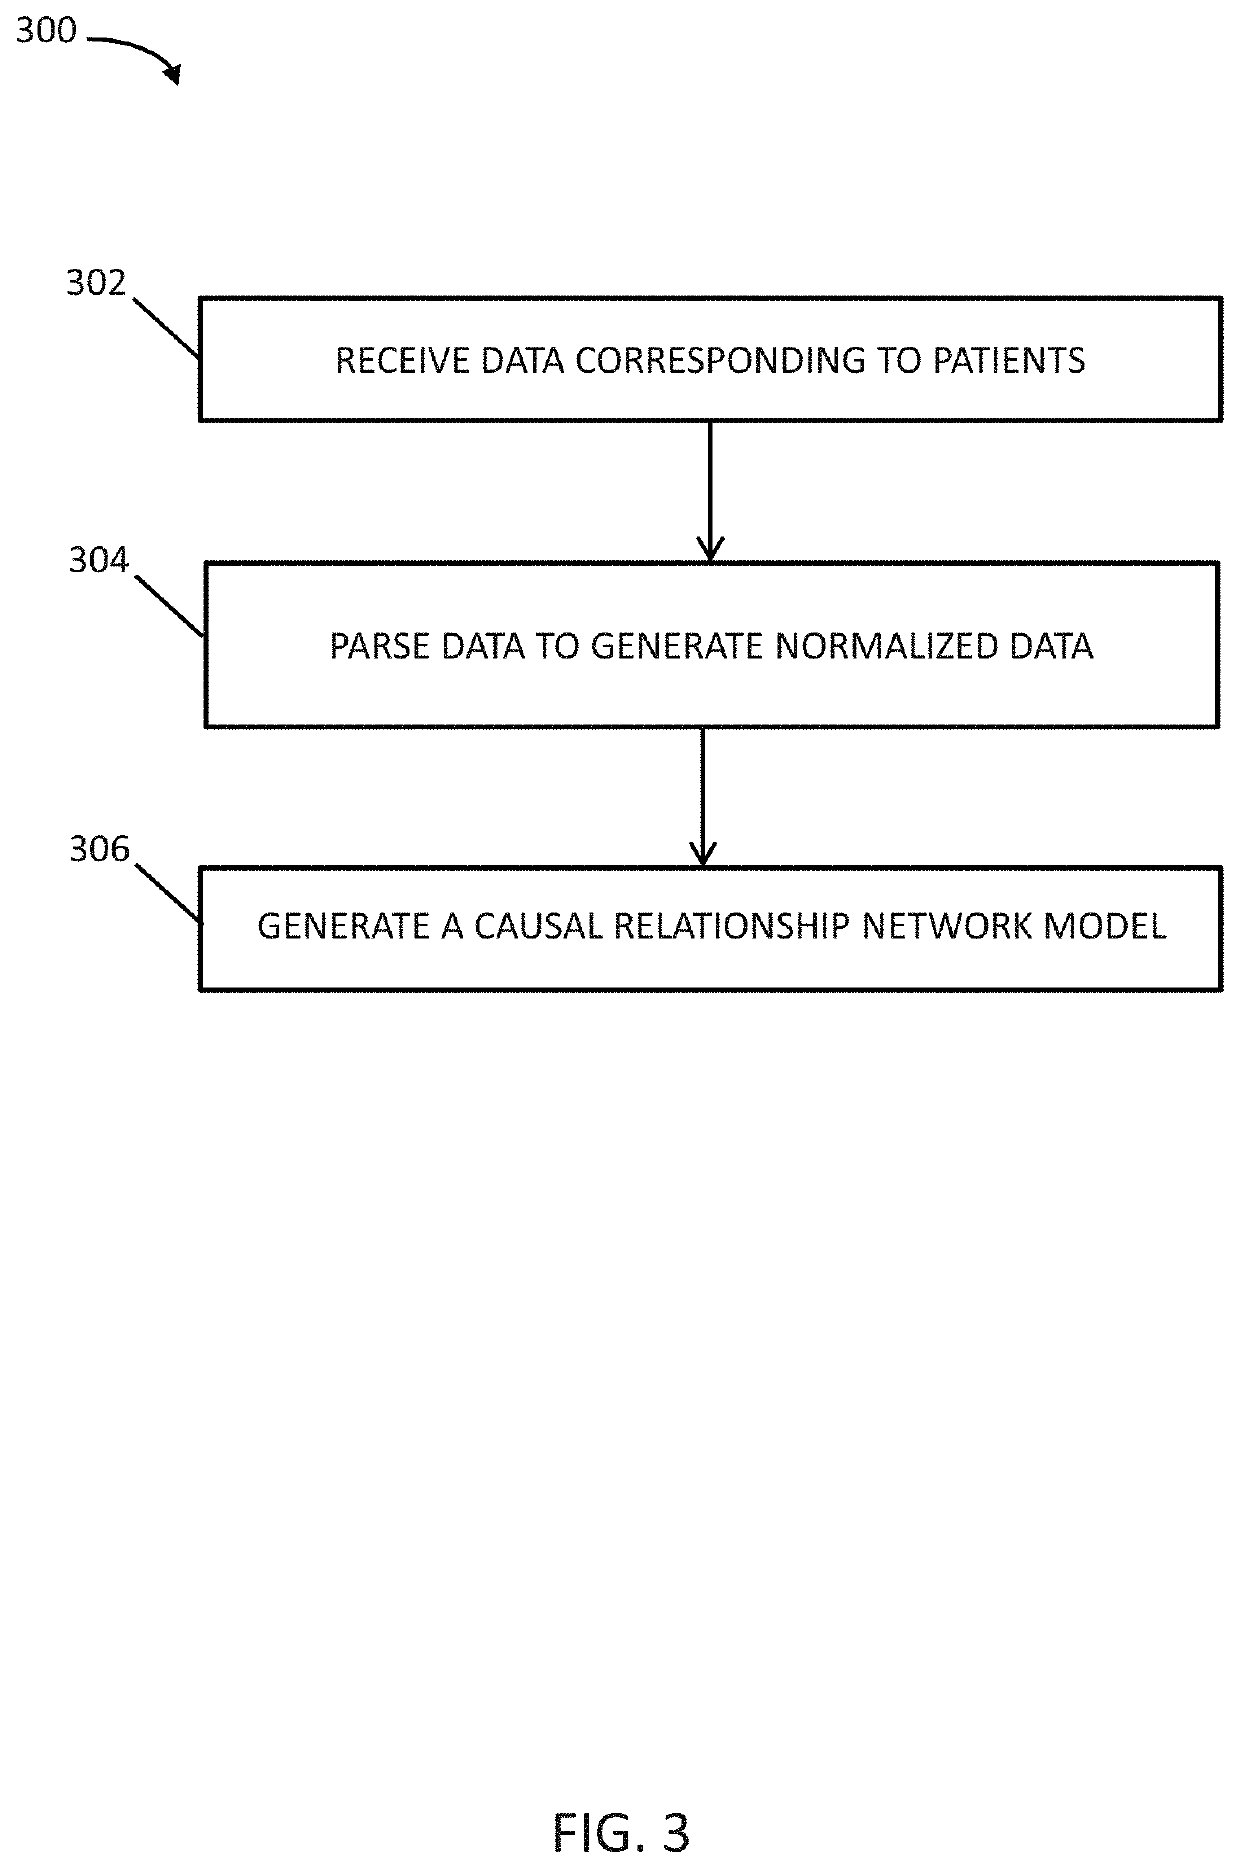 Bayesian causal relationship network models for healthcare diagnosis and treatment based on patient data